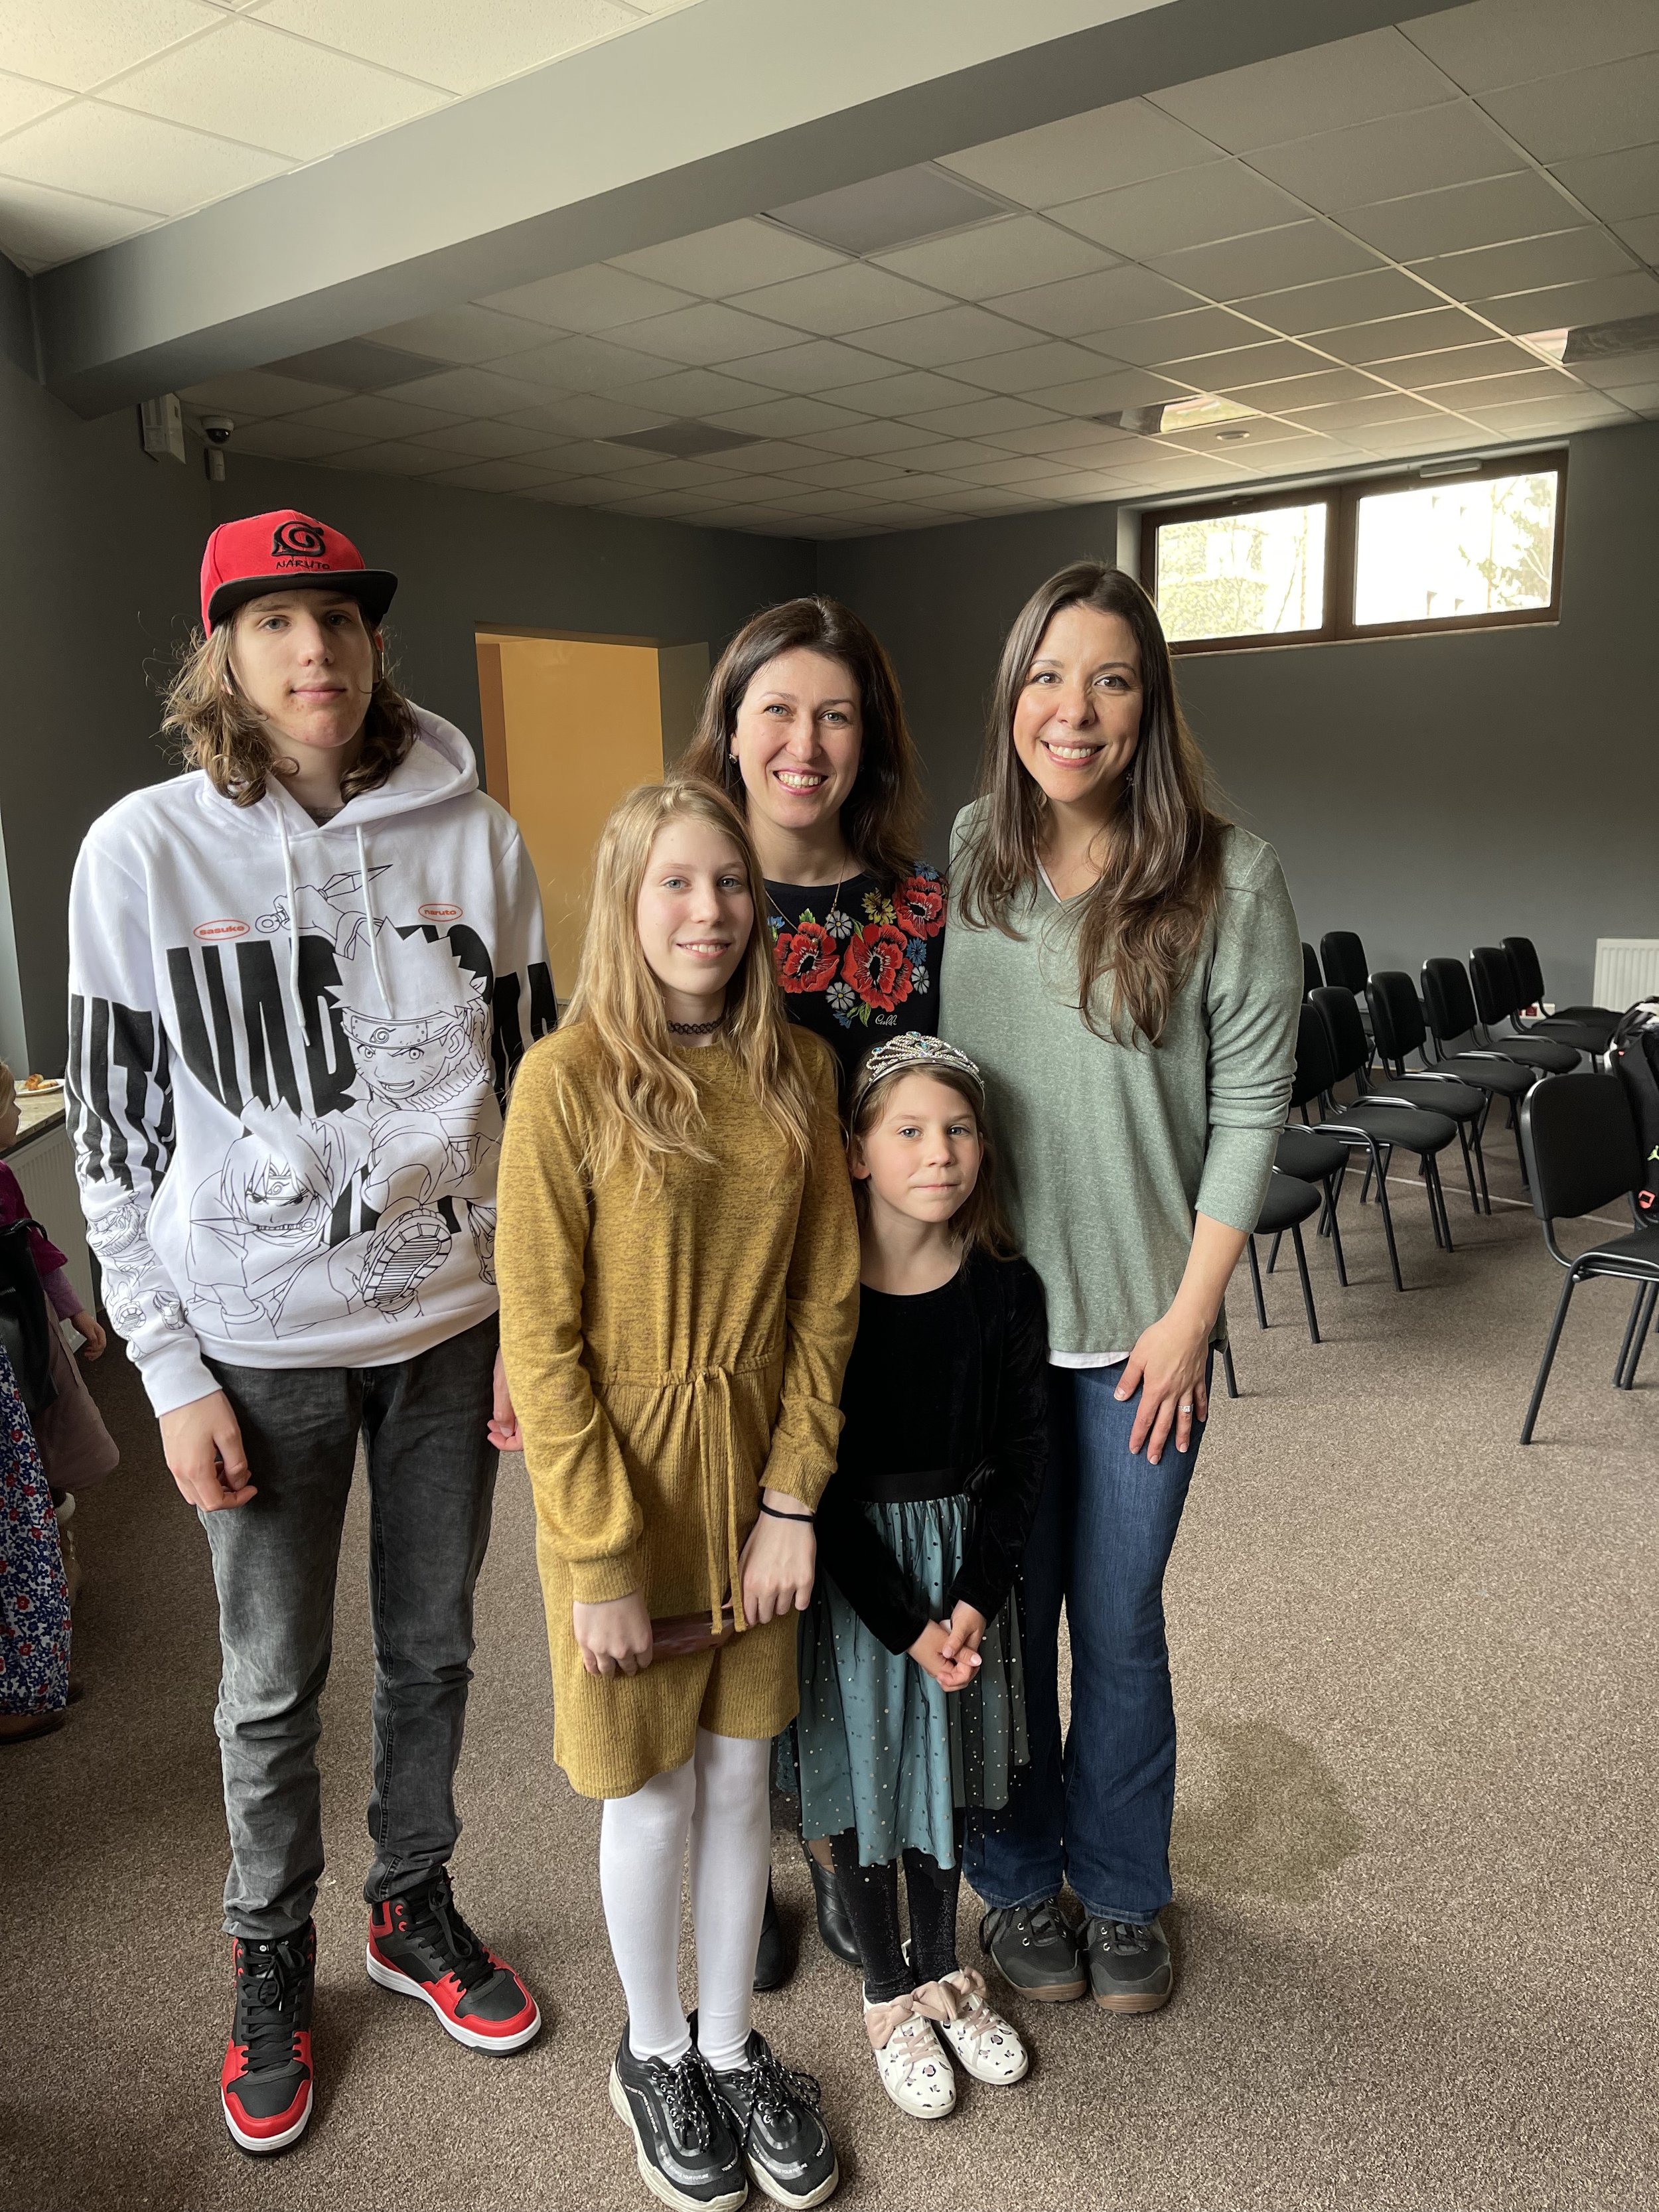 Easter 2022 - Lauren with Ukrainian Mother of 3, Juliya, and children Denis, Tanya, and Anya. This family lived in a refugee shelter in Lublin, Poland supported by your donations.